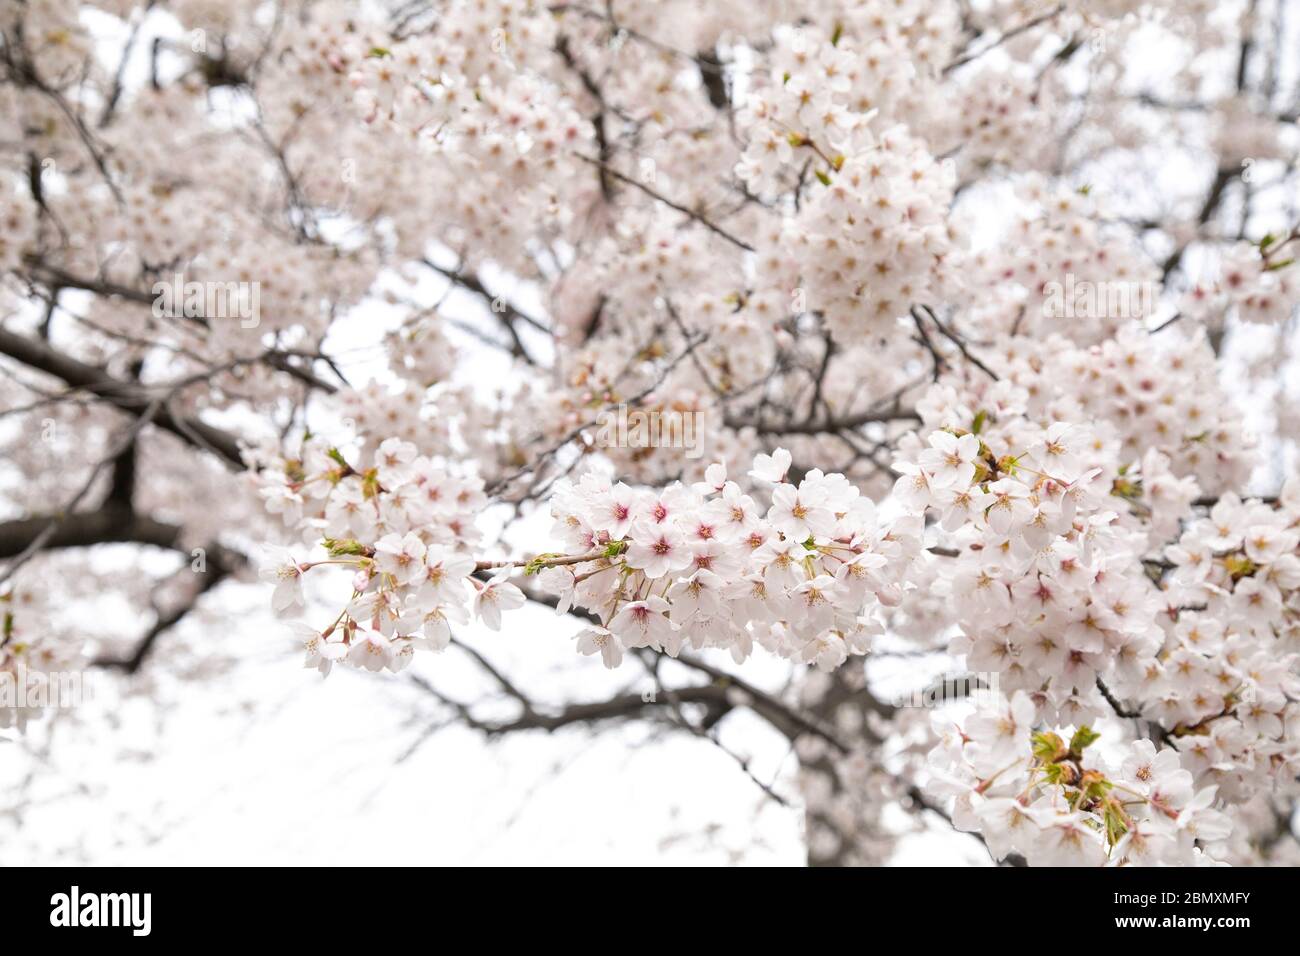 Cherry Blossom in bloom in Central Park, New York City. Stock Photo